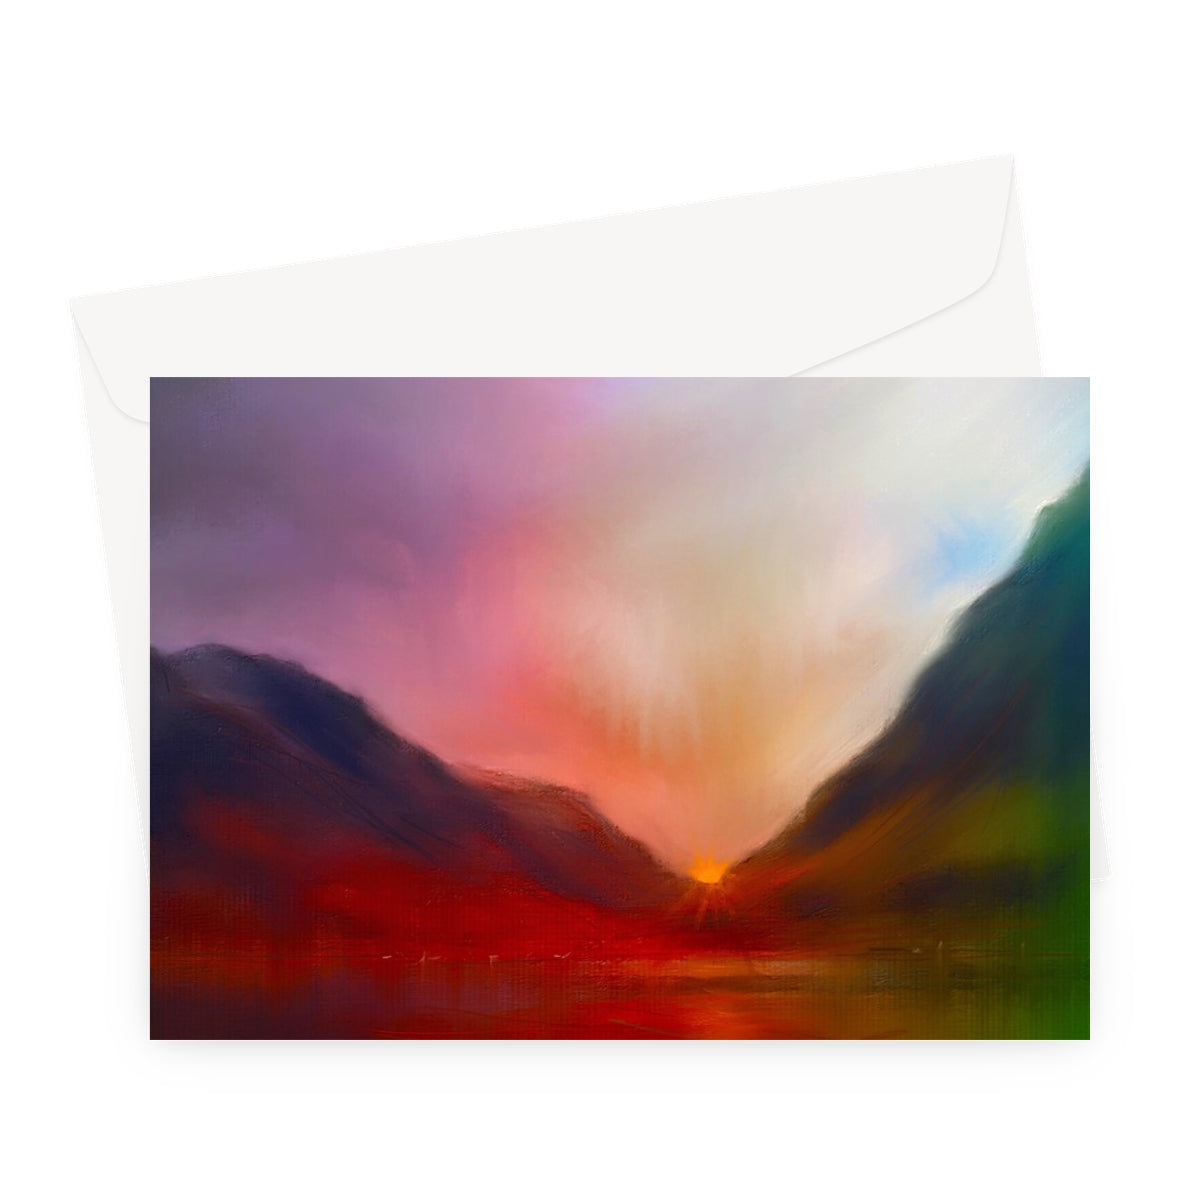 Glencoe Sunset Art Gifts Greeting Card-Greetings Cards-Glencoe Art Gallery-A5 Landscape-10 Cards-Paintings, Prints, Homeware, Art Gifts From Scotland By Scottish Artist Kevin Hunter